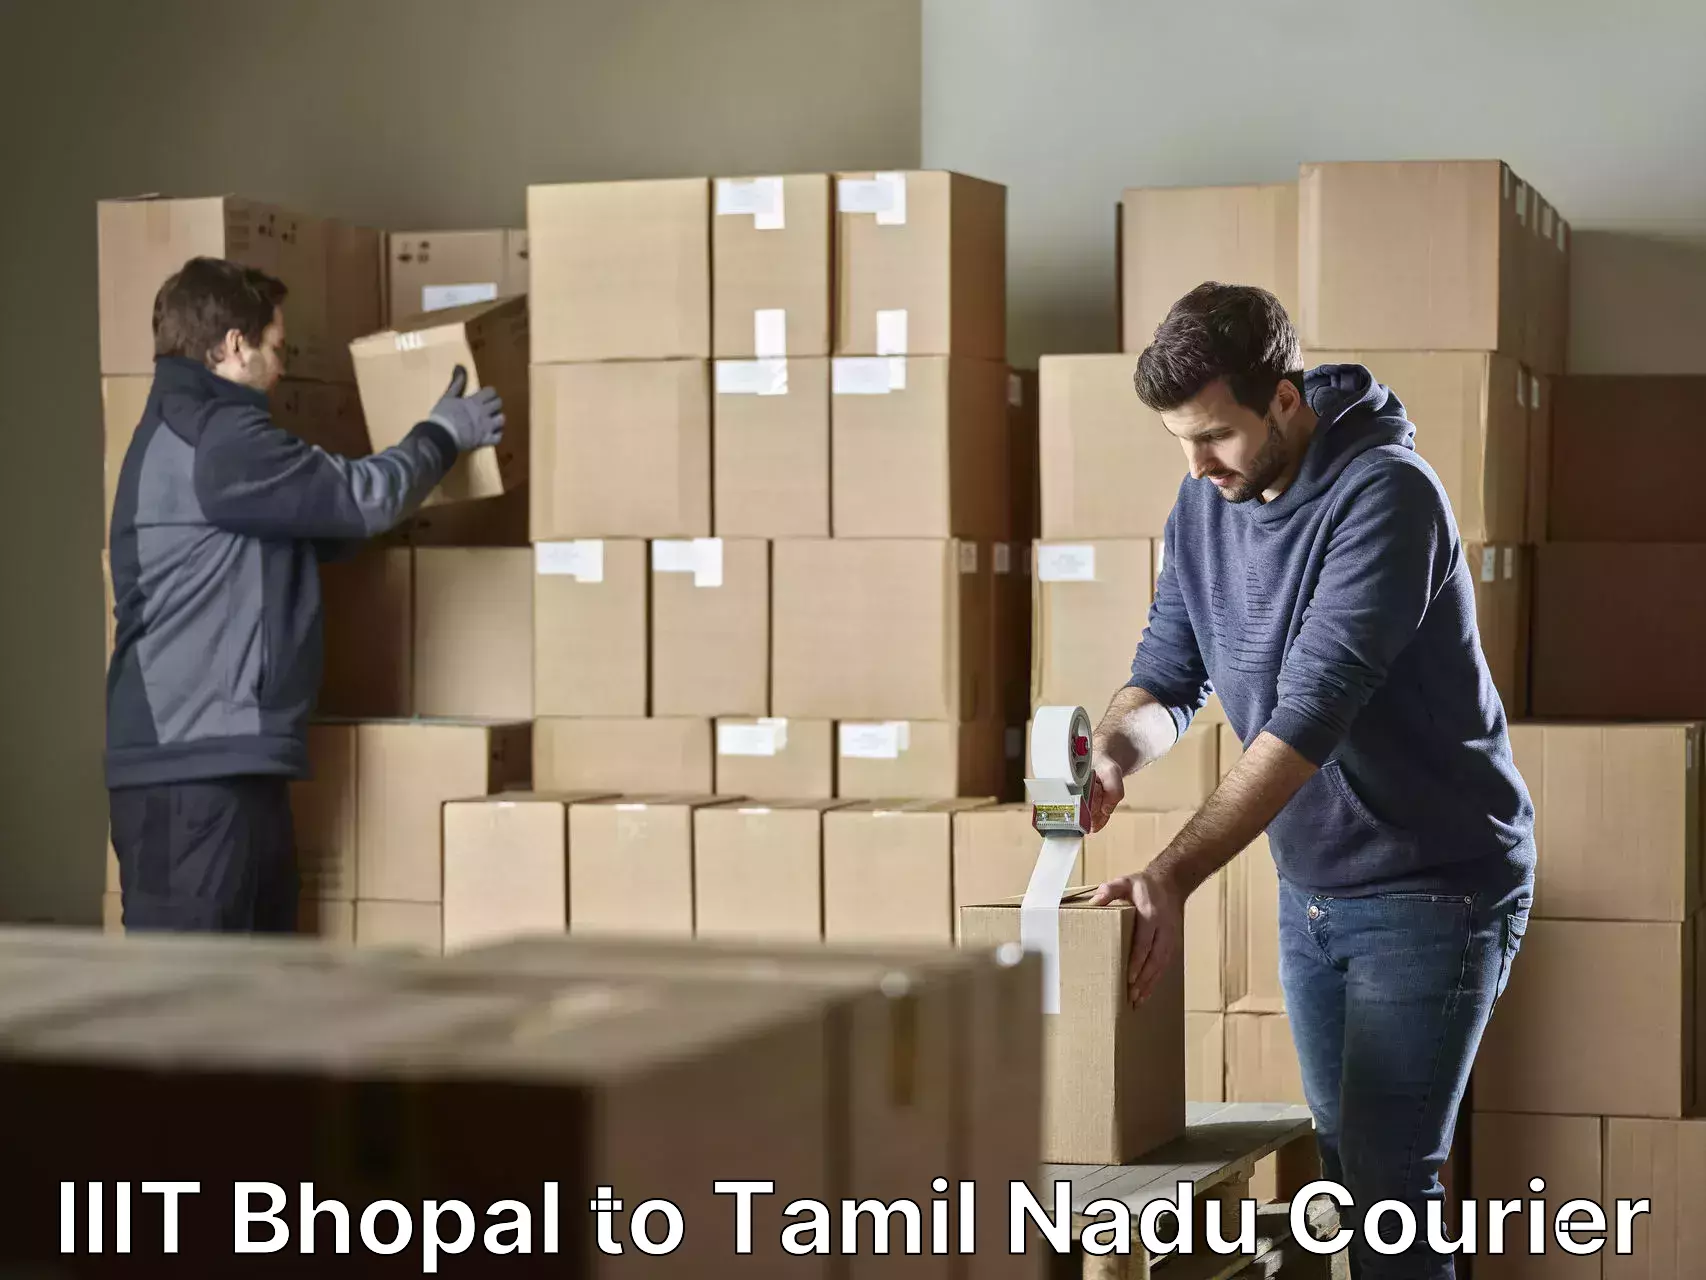 Professional home movers IIIT Bhopal to Tiruchi